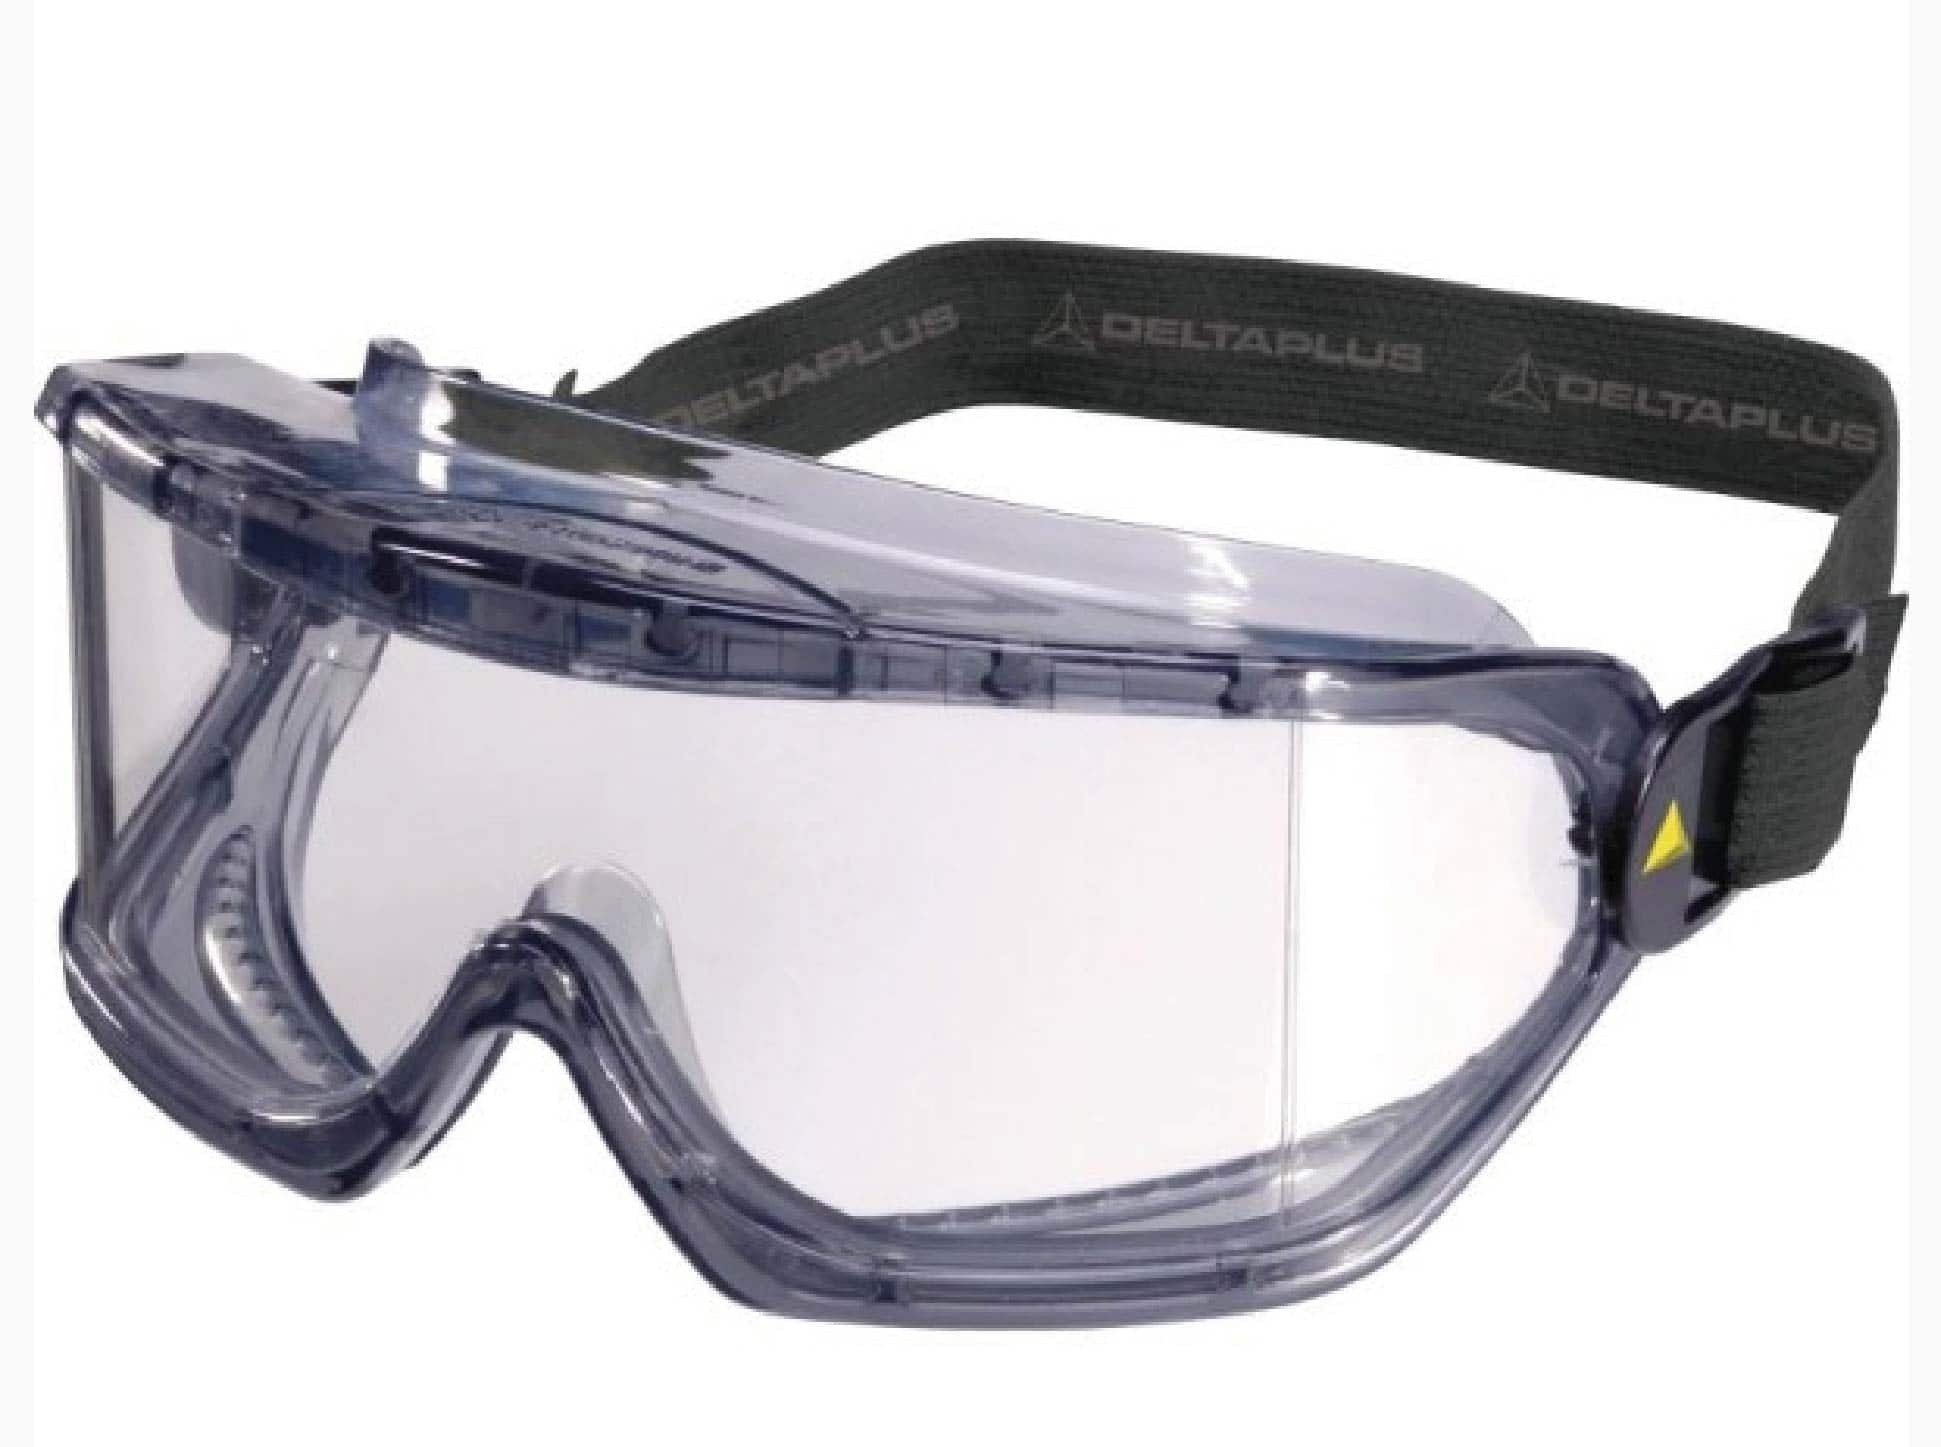 Polycarbonate goggles